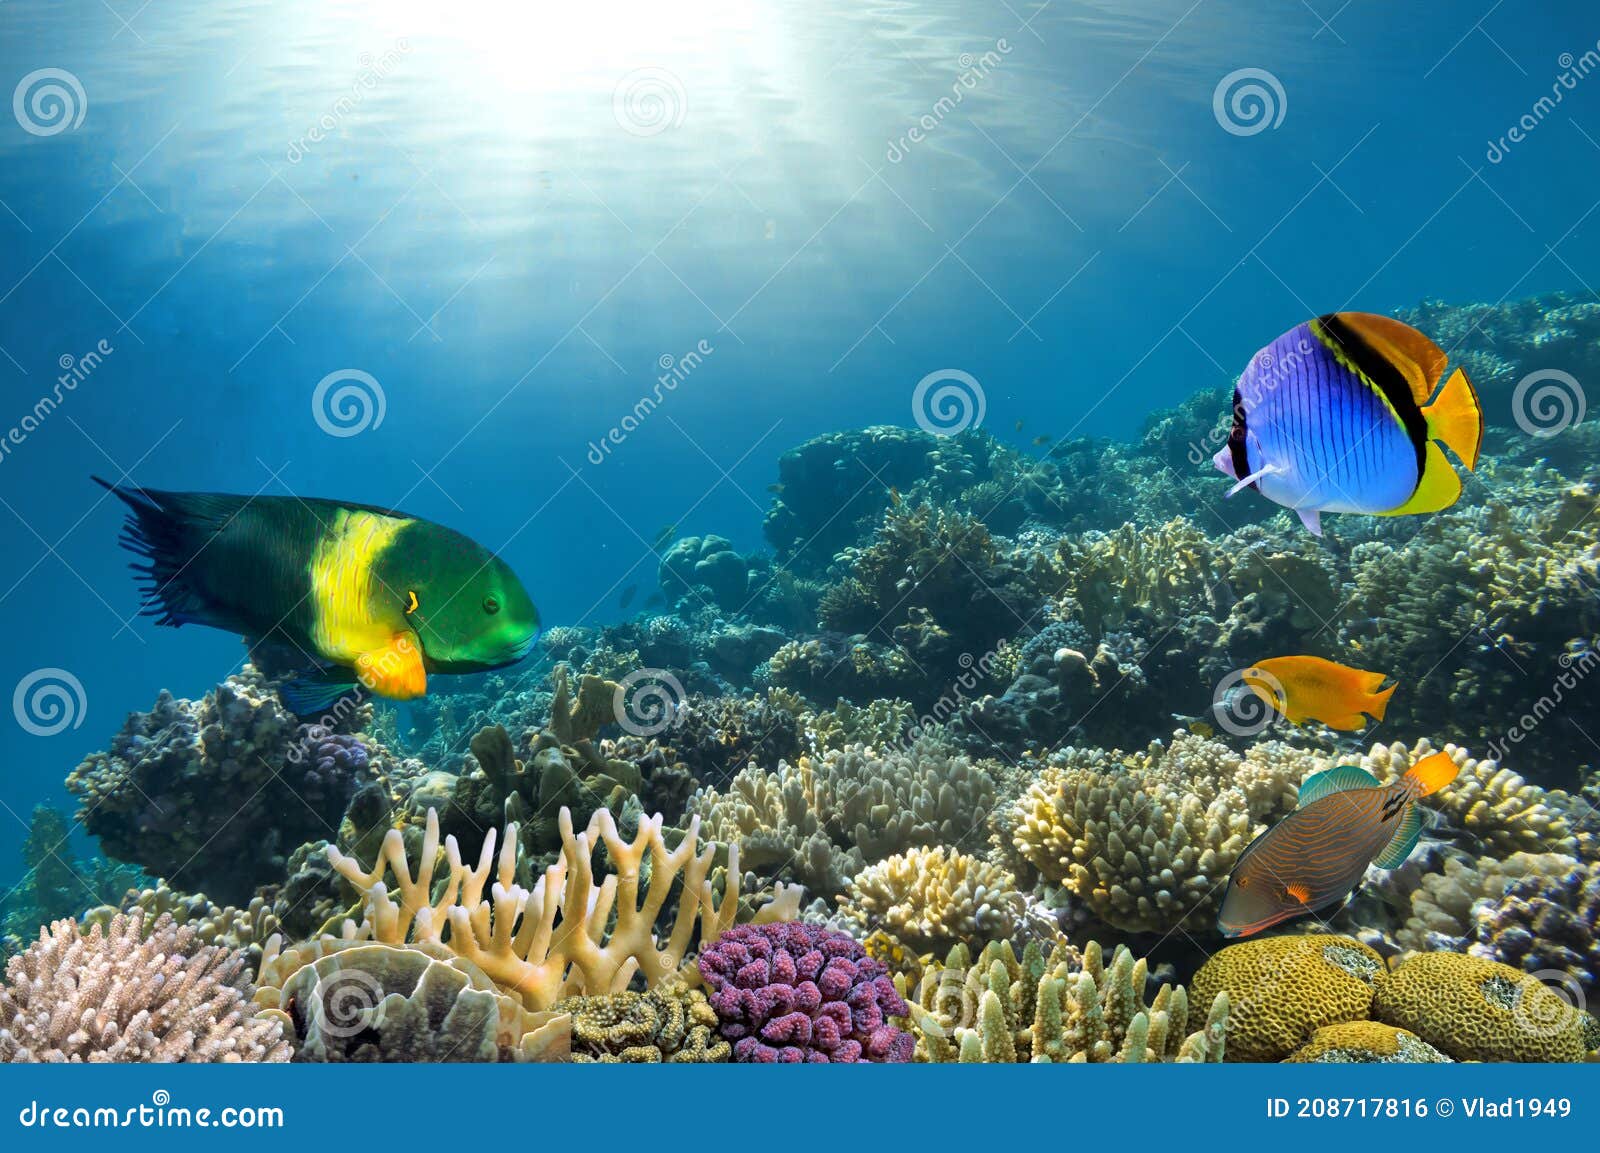 Photo of a Coral Colony on a Reef Top Red Sea Stock Photo - Image of ...